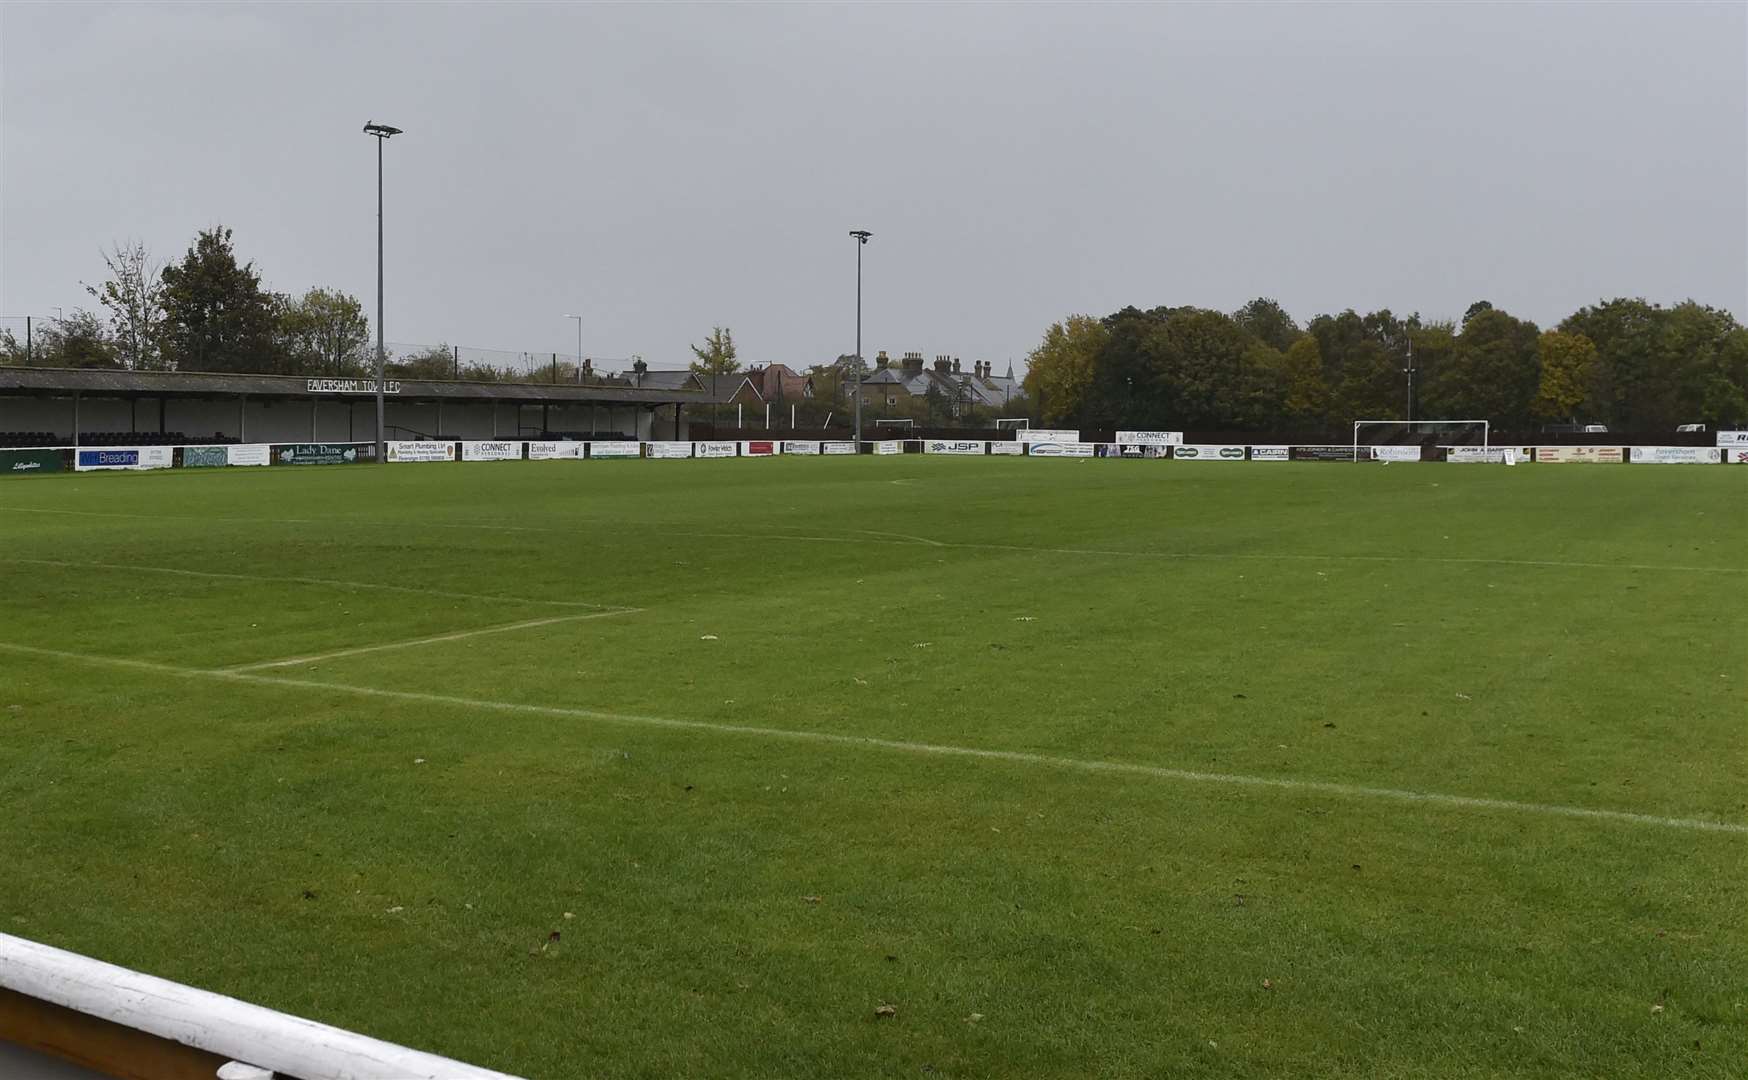 Canterbury City Football Club ground-share at Faversham Town's Salters Lane. Picture: Tony Flashman